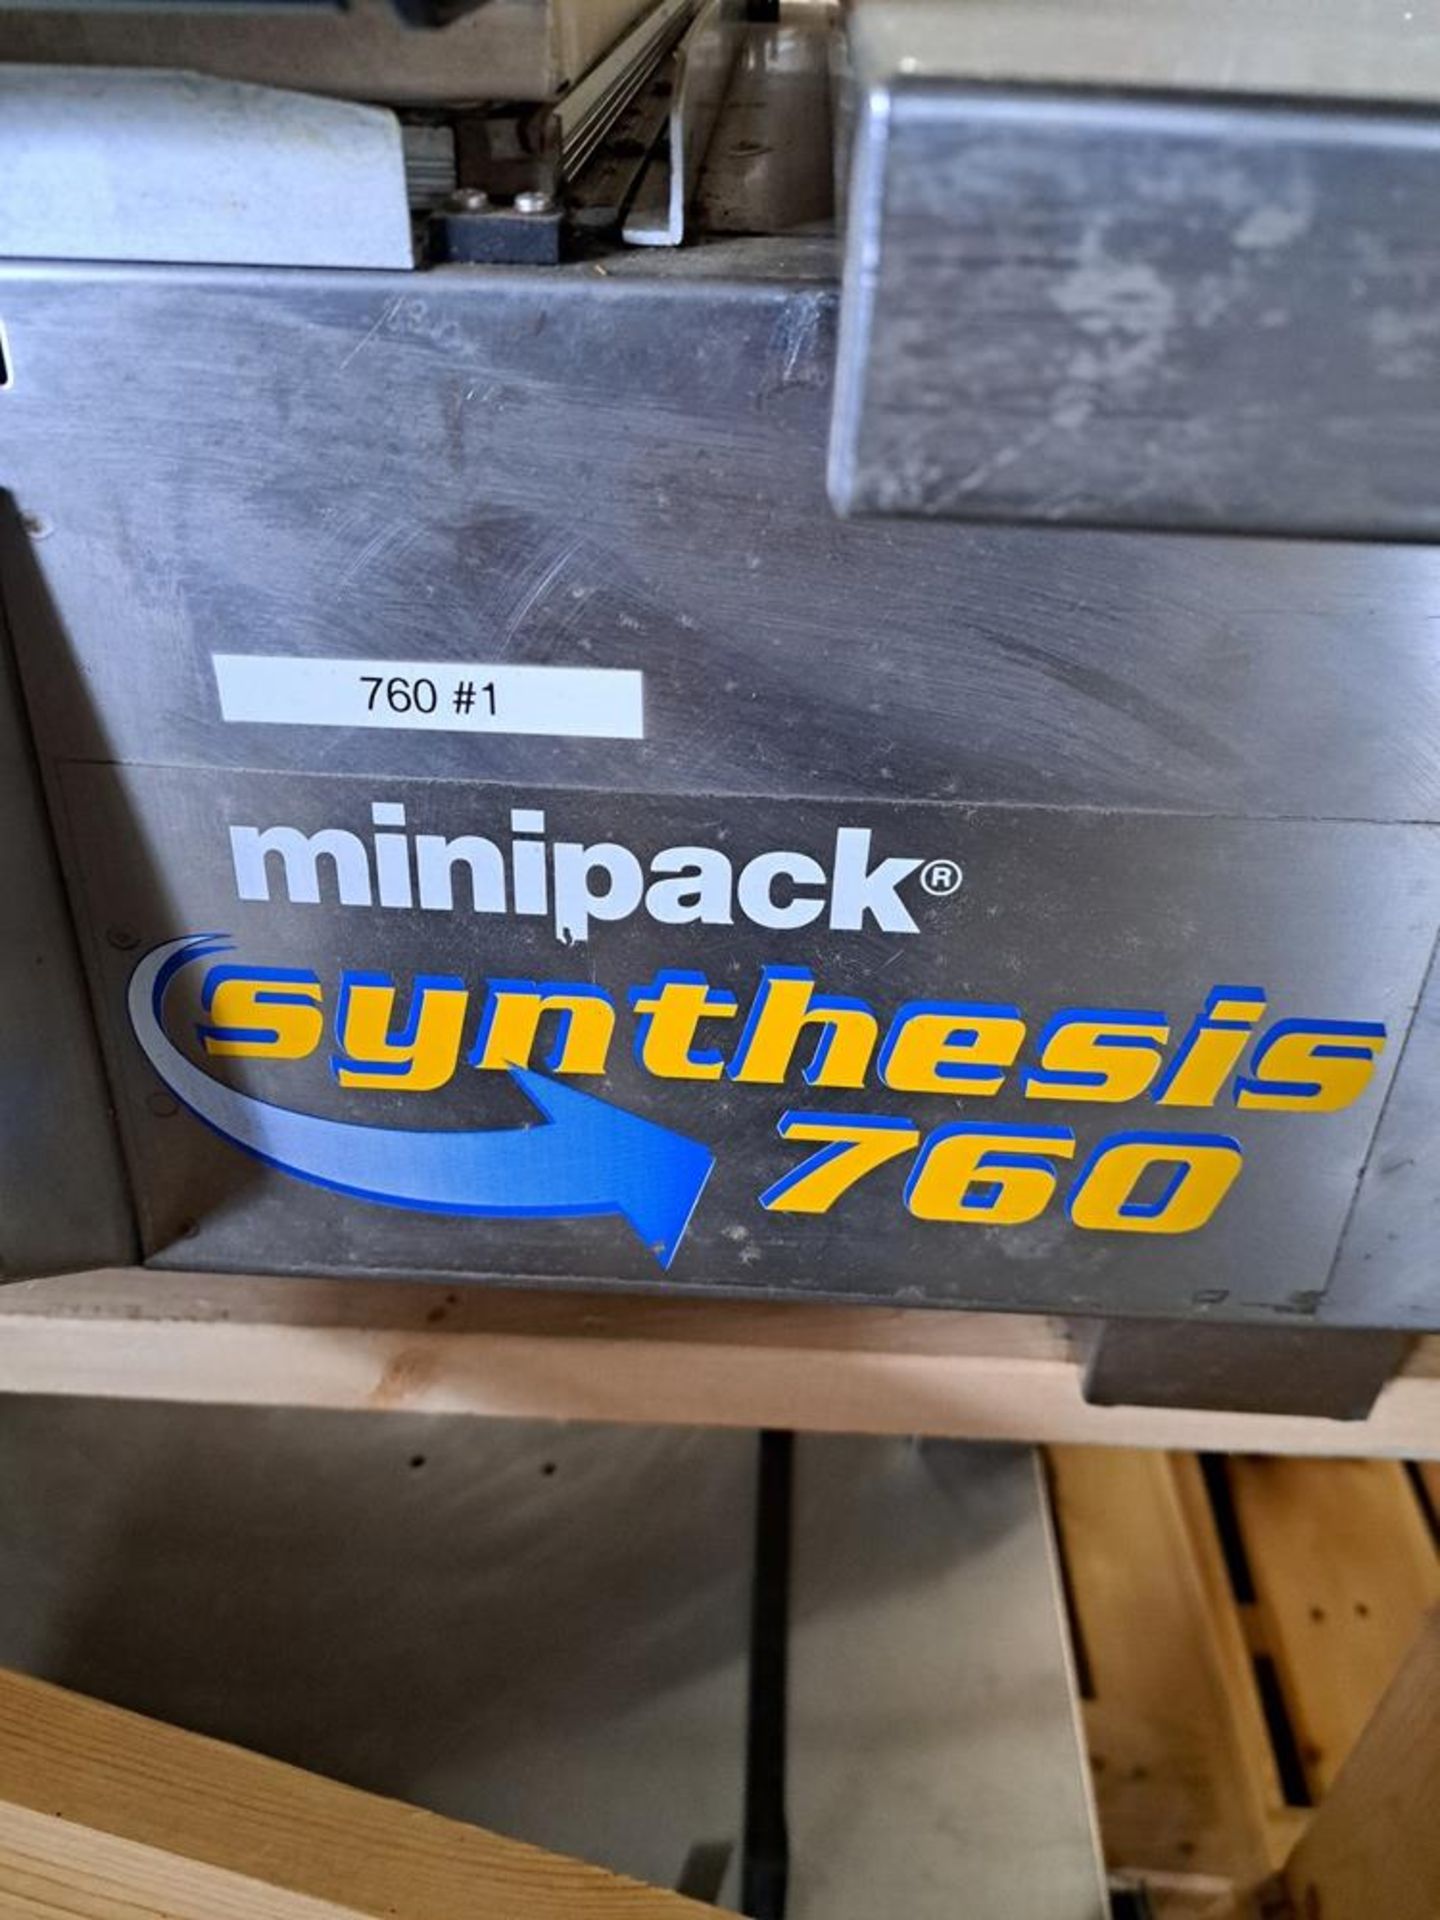 Mini Pack Mdl. Synthesis Shrink Wrap Machine, Ser. #001477, 220/230 volts (Located in Sandwich, IL) - Image 2 of 7